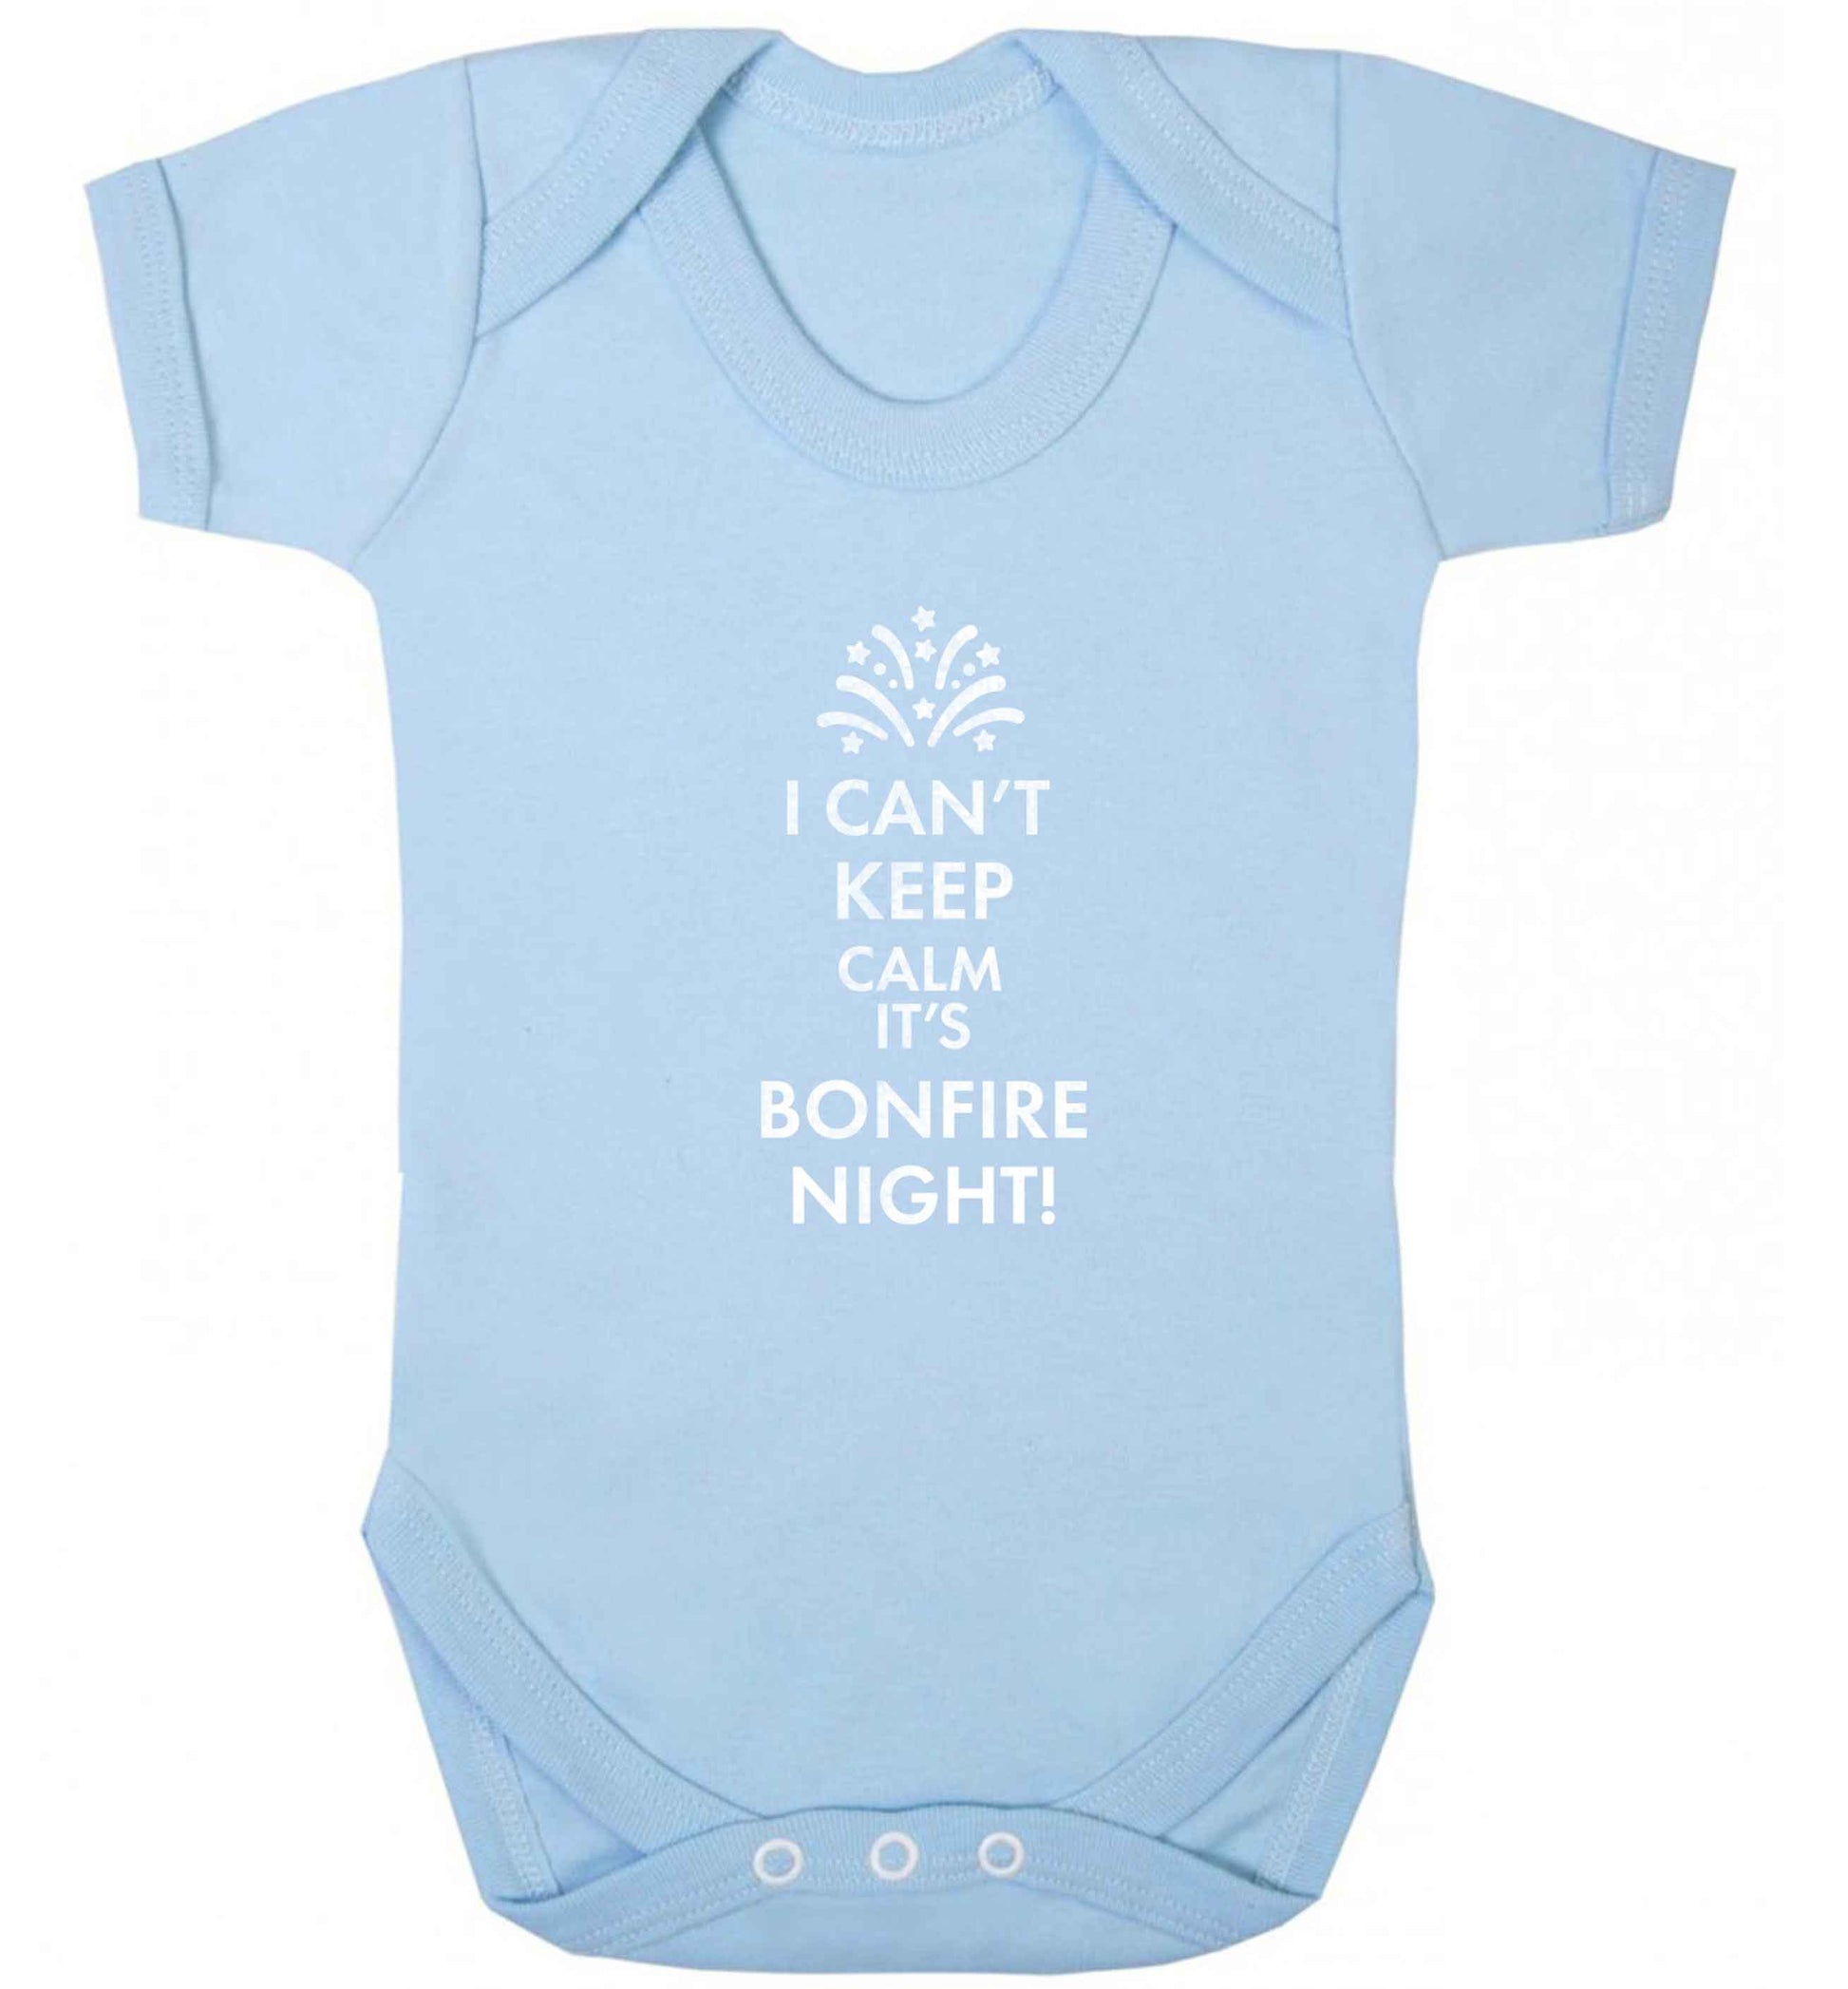 I can't keep calm its bonfire night baby vest pale blue 18-24 months